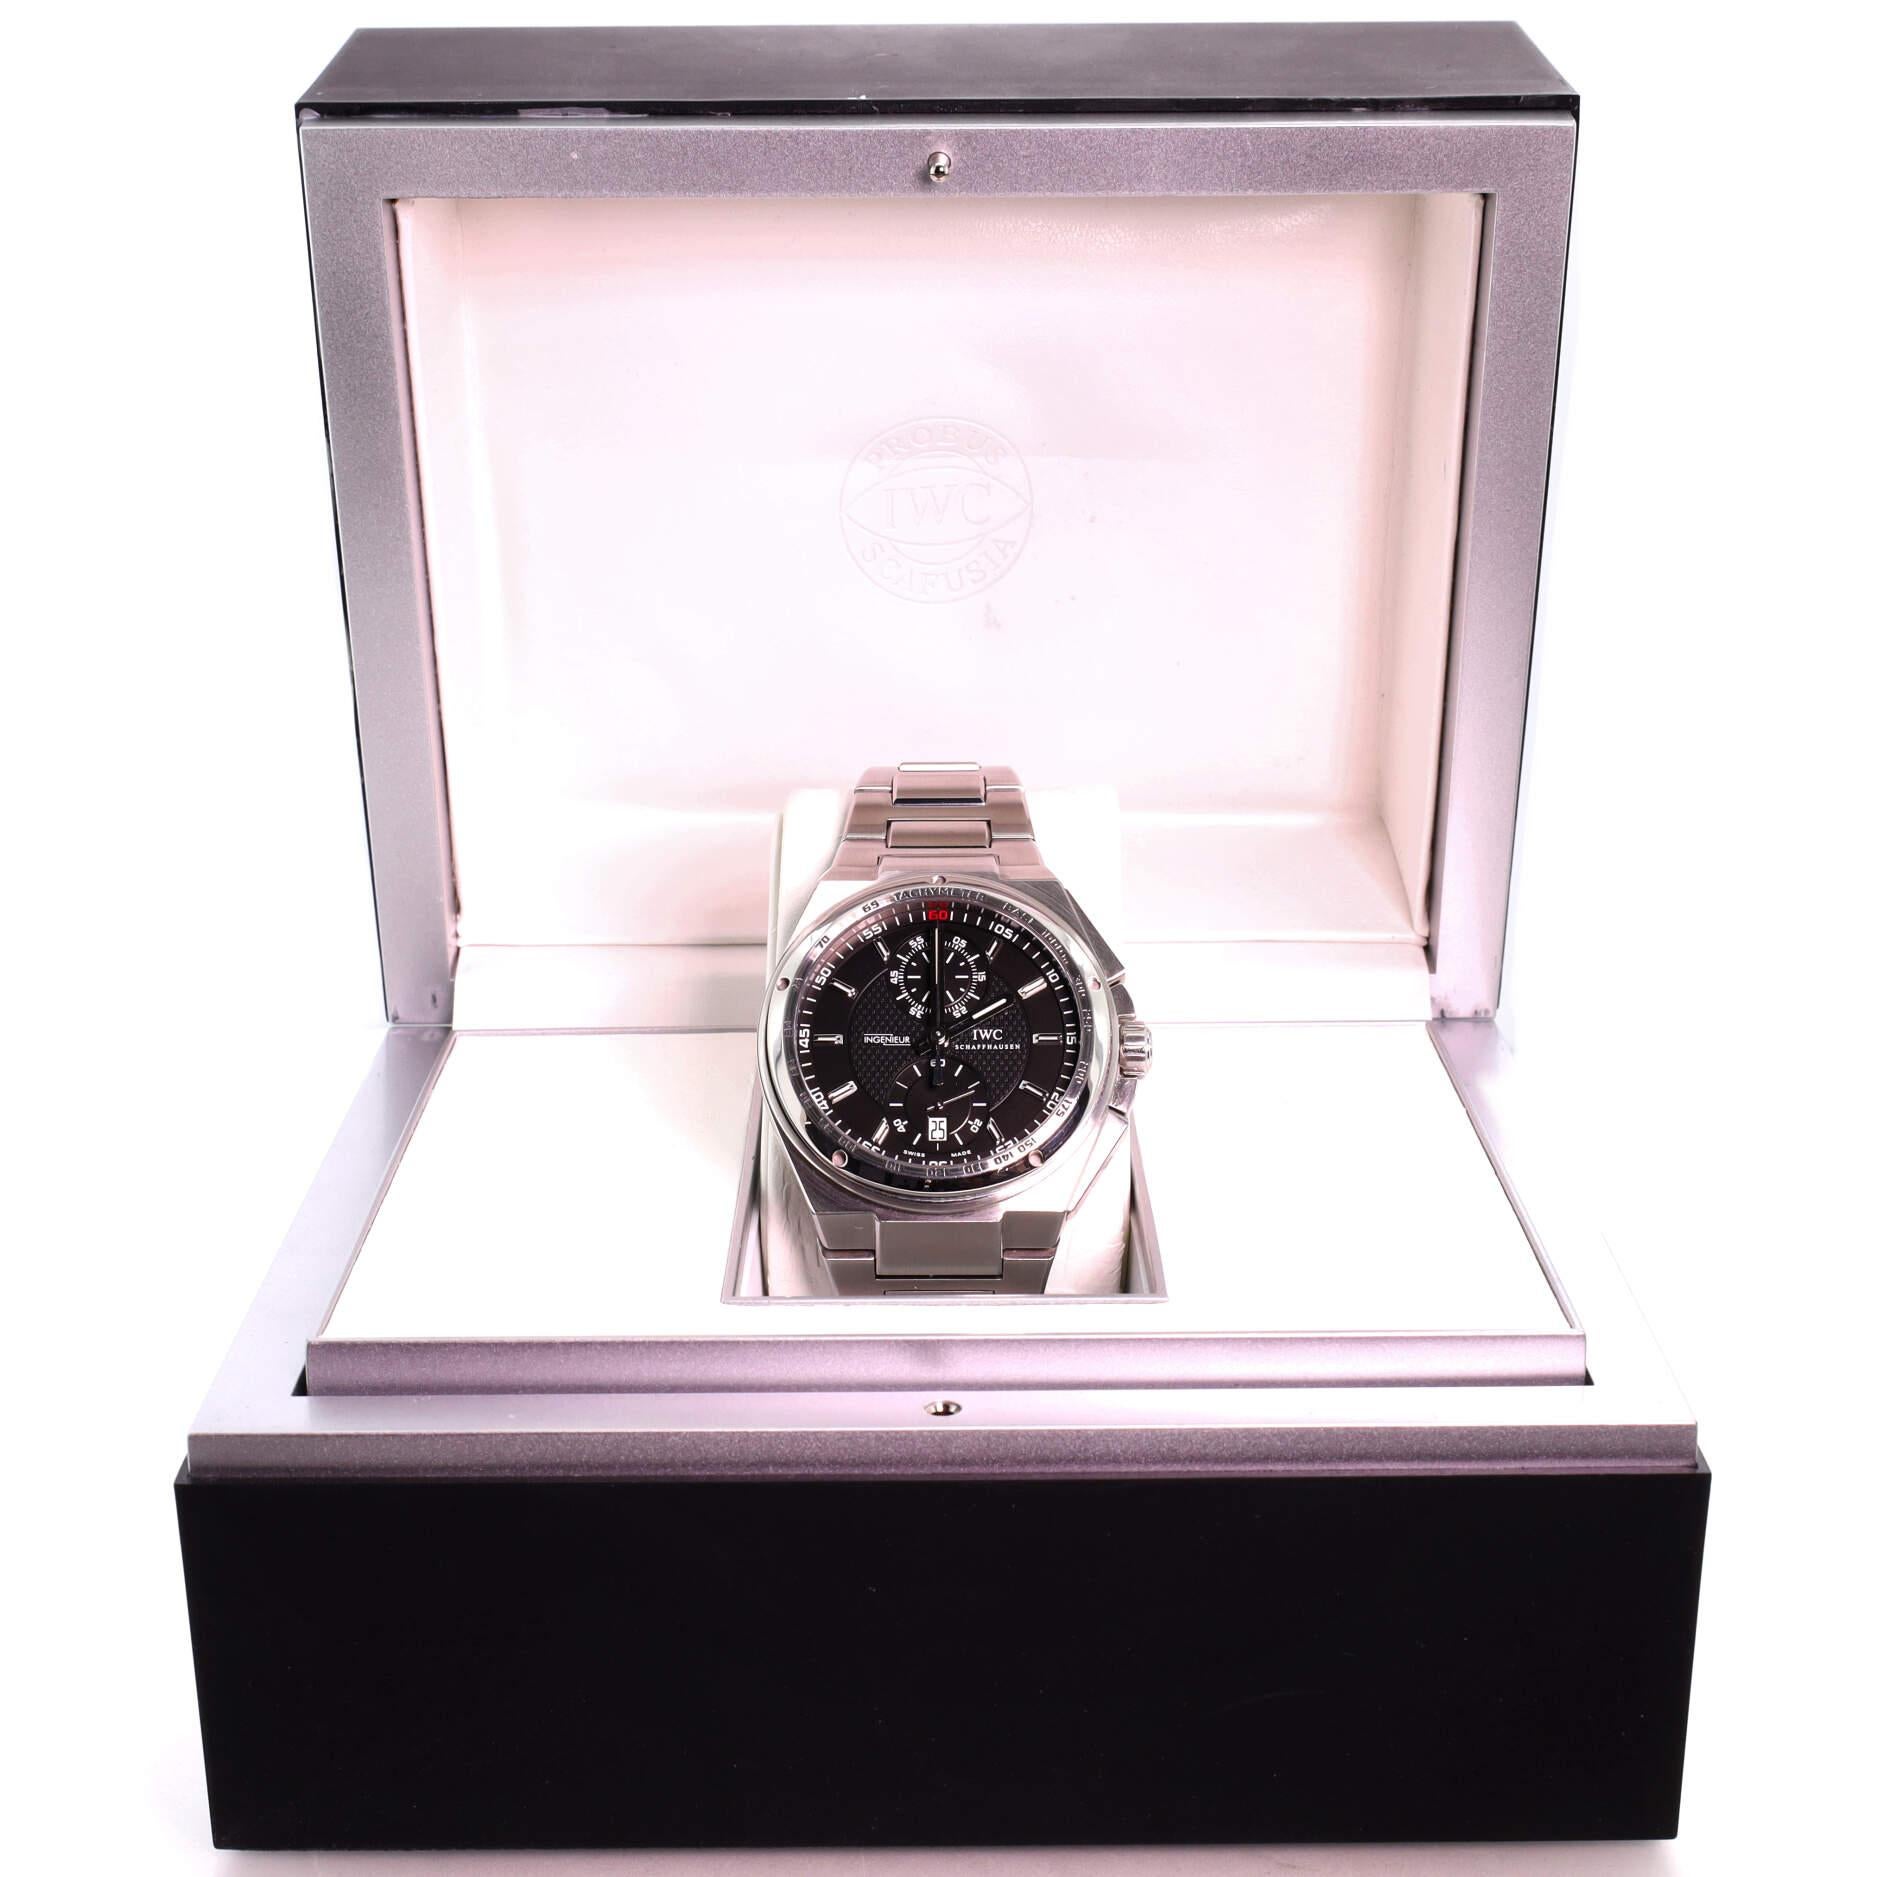 Condition: Very good. Moderate wear throughout. Wear and scratches on case and bracelet.
Accessories: Box, Warranty Card - Dated, Instruction Booklet
Measurements: Case Size/Width: 45mm, Watch Height: 15mm, Band Width: 28mm, Wrist circumference: